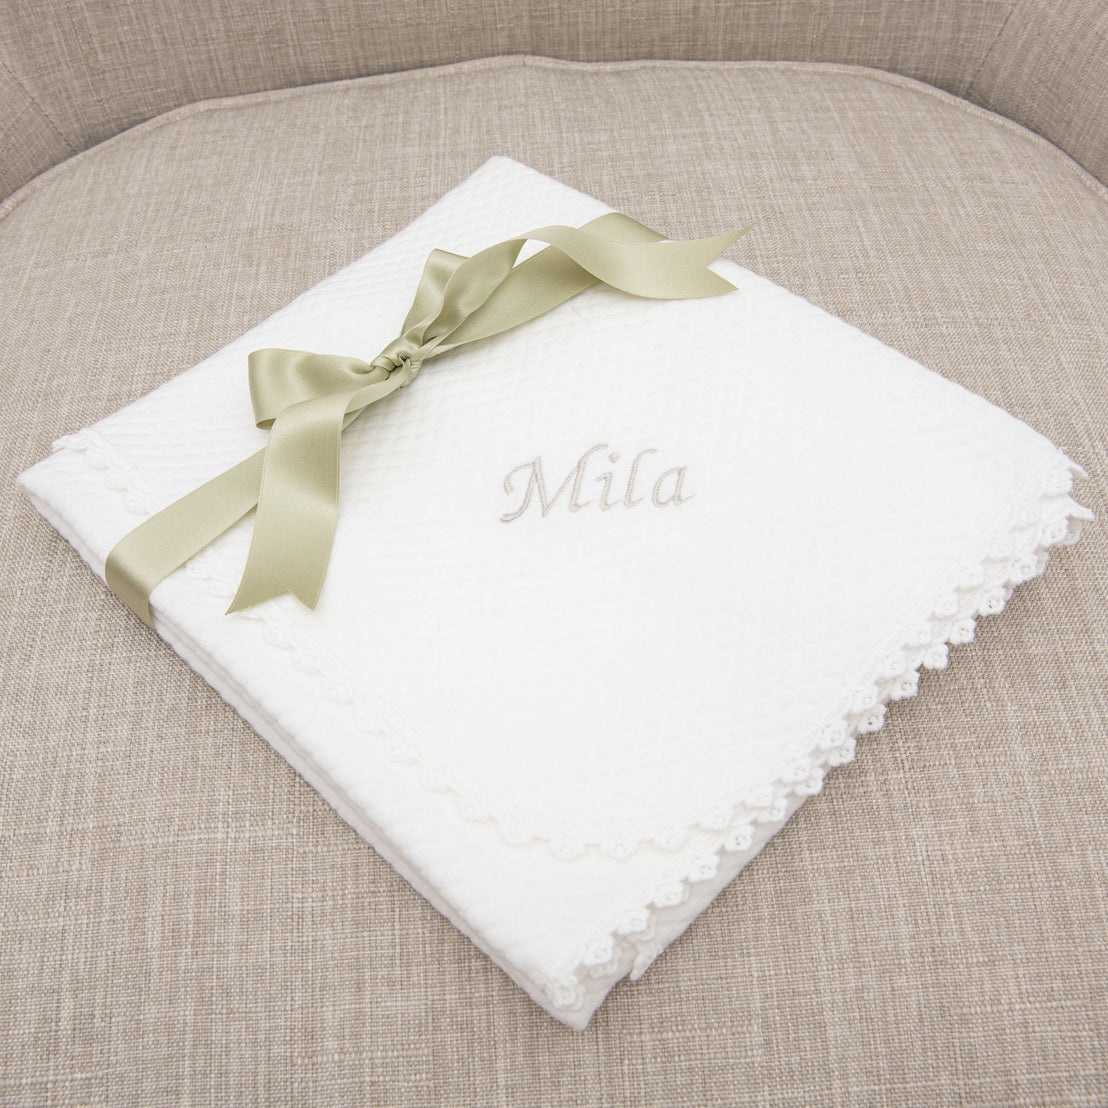 The Mila personalized blanket with the name "Mila" embroidered in silver thread, designed as an heirloom for a newborn, adorned with a sage green ribbon, neatly placed on a textured beige fabric chair.